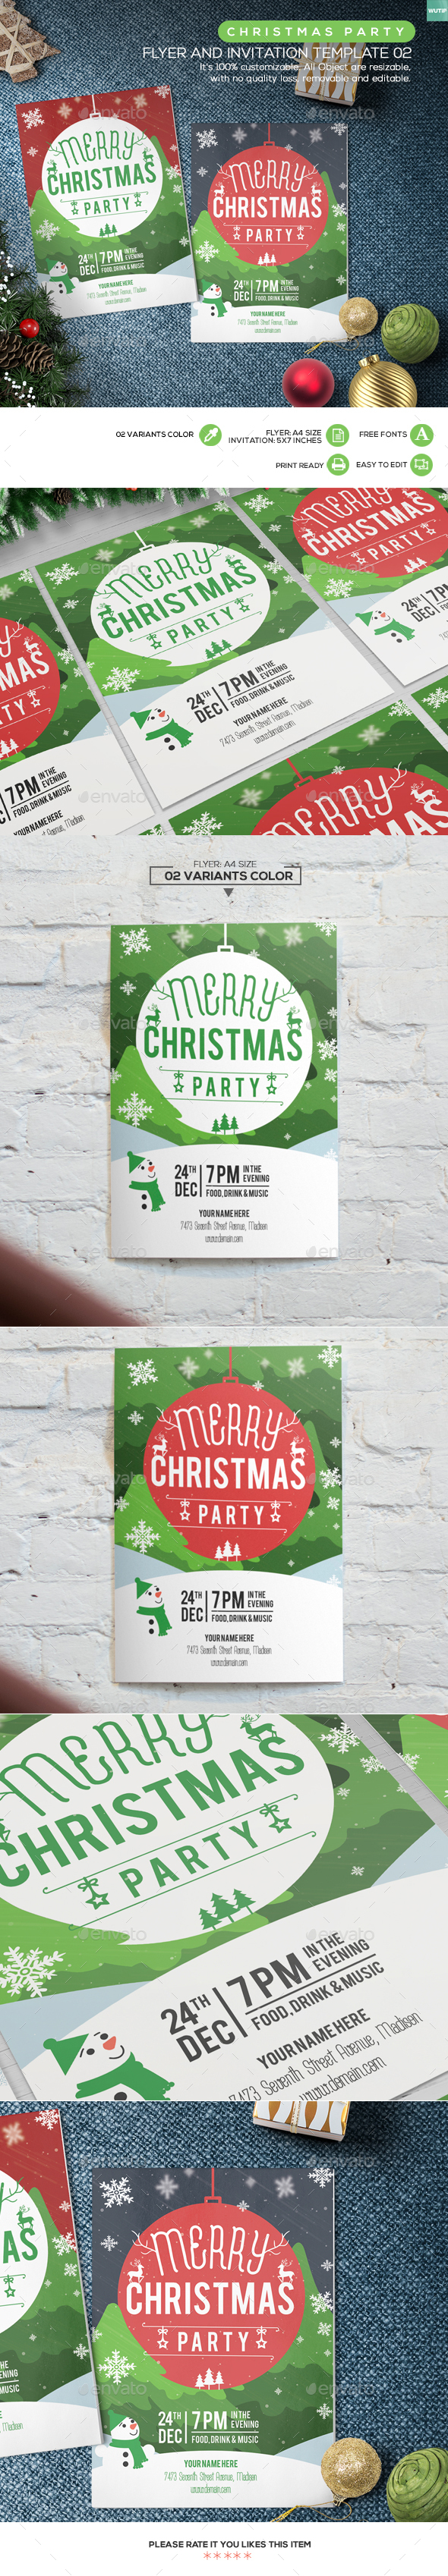 Christmas Party Flyer and Invitation Template 02